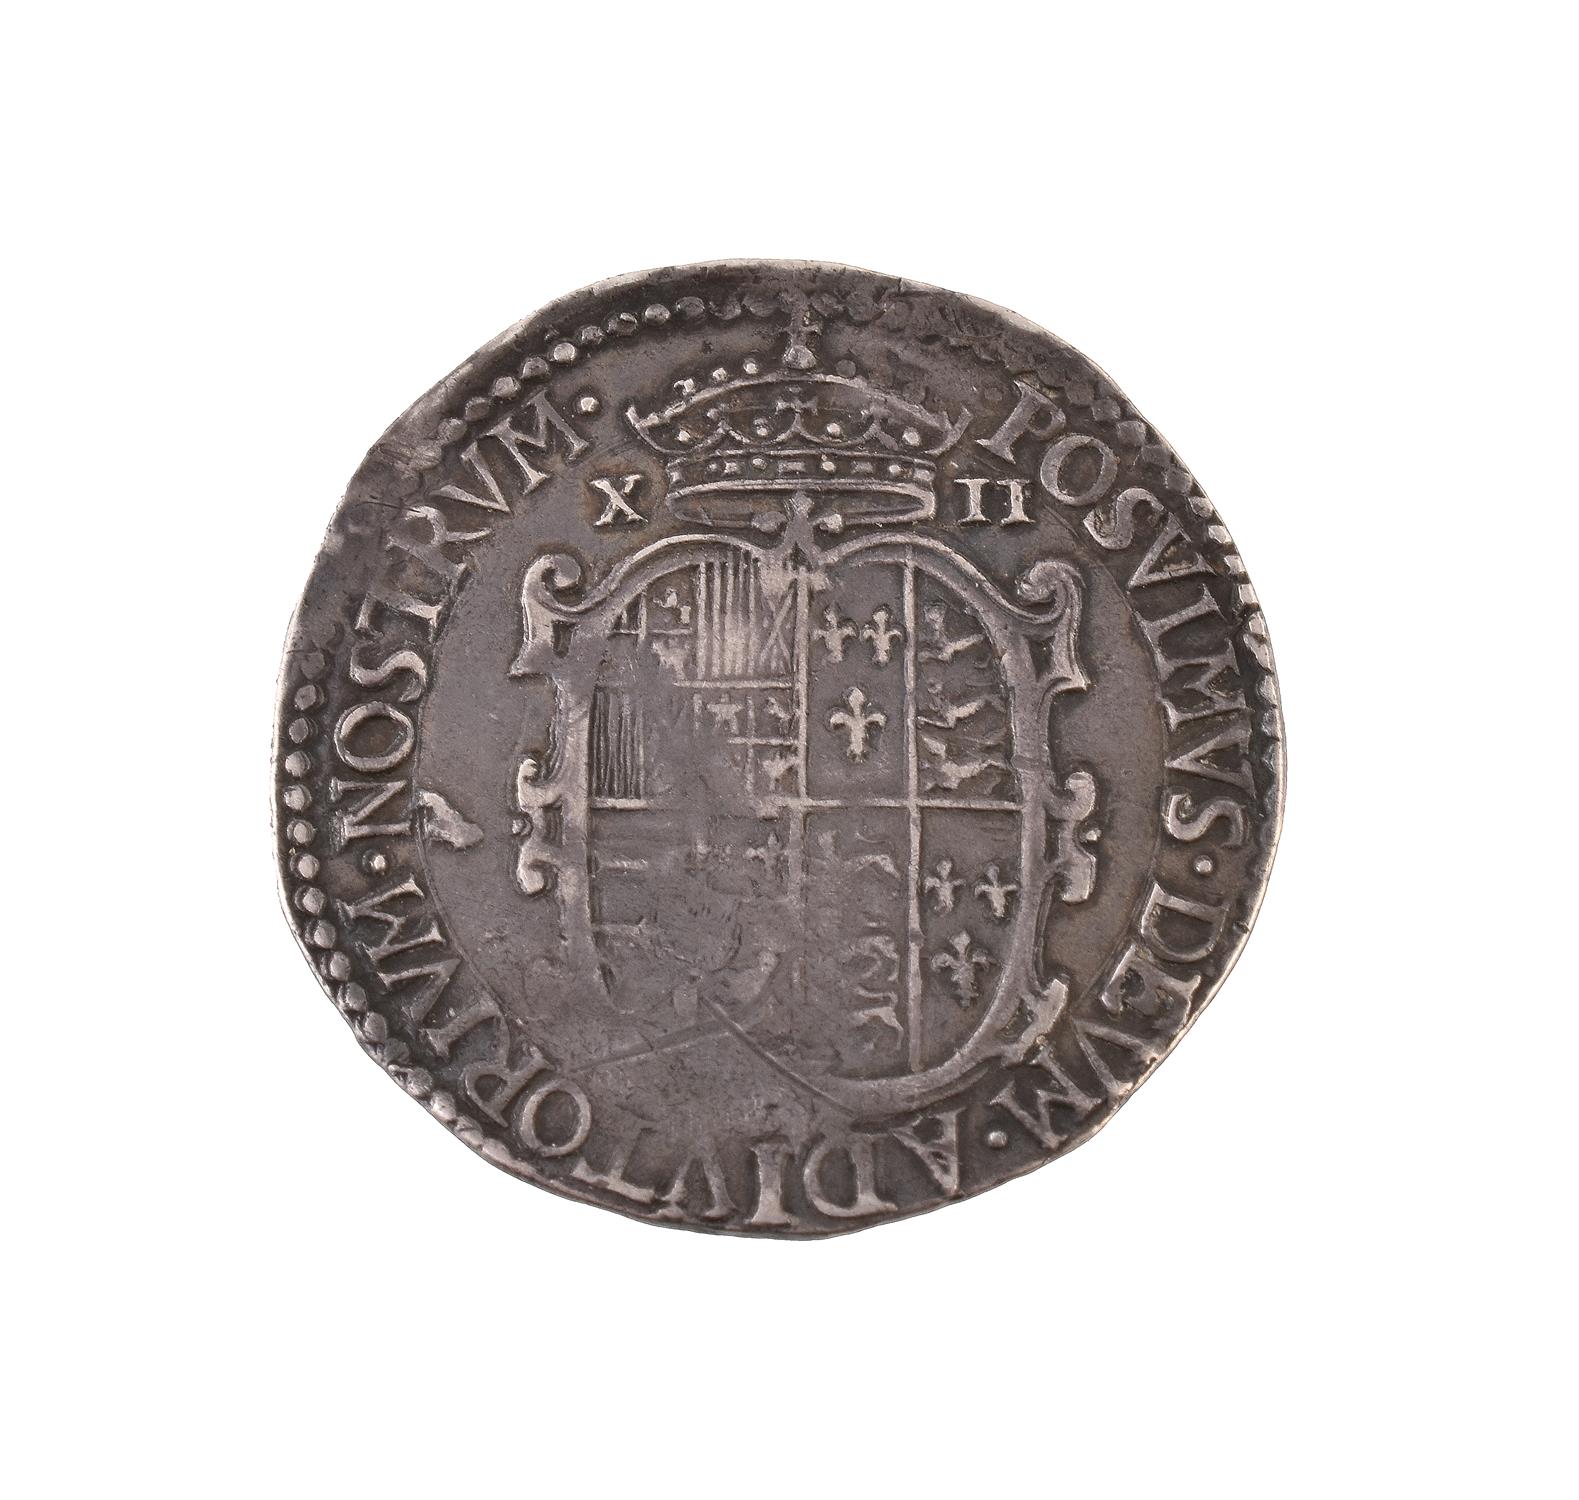 Philip and Mary (1553-1554), Shilling 1554 - Image 2 of 2